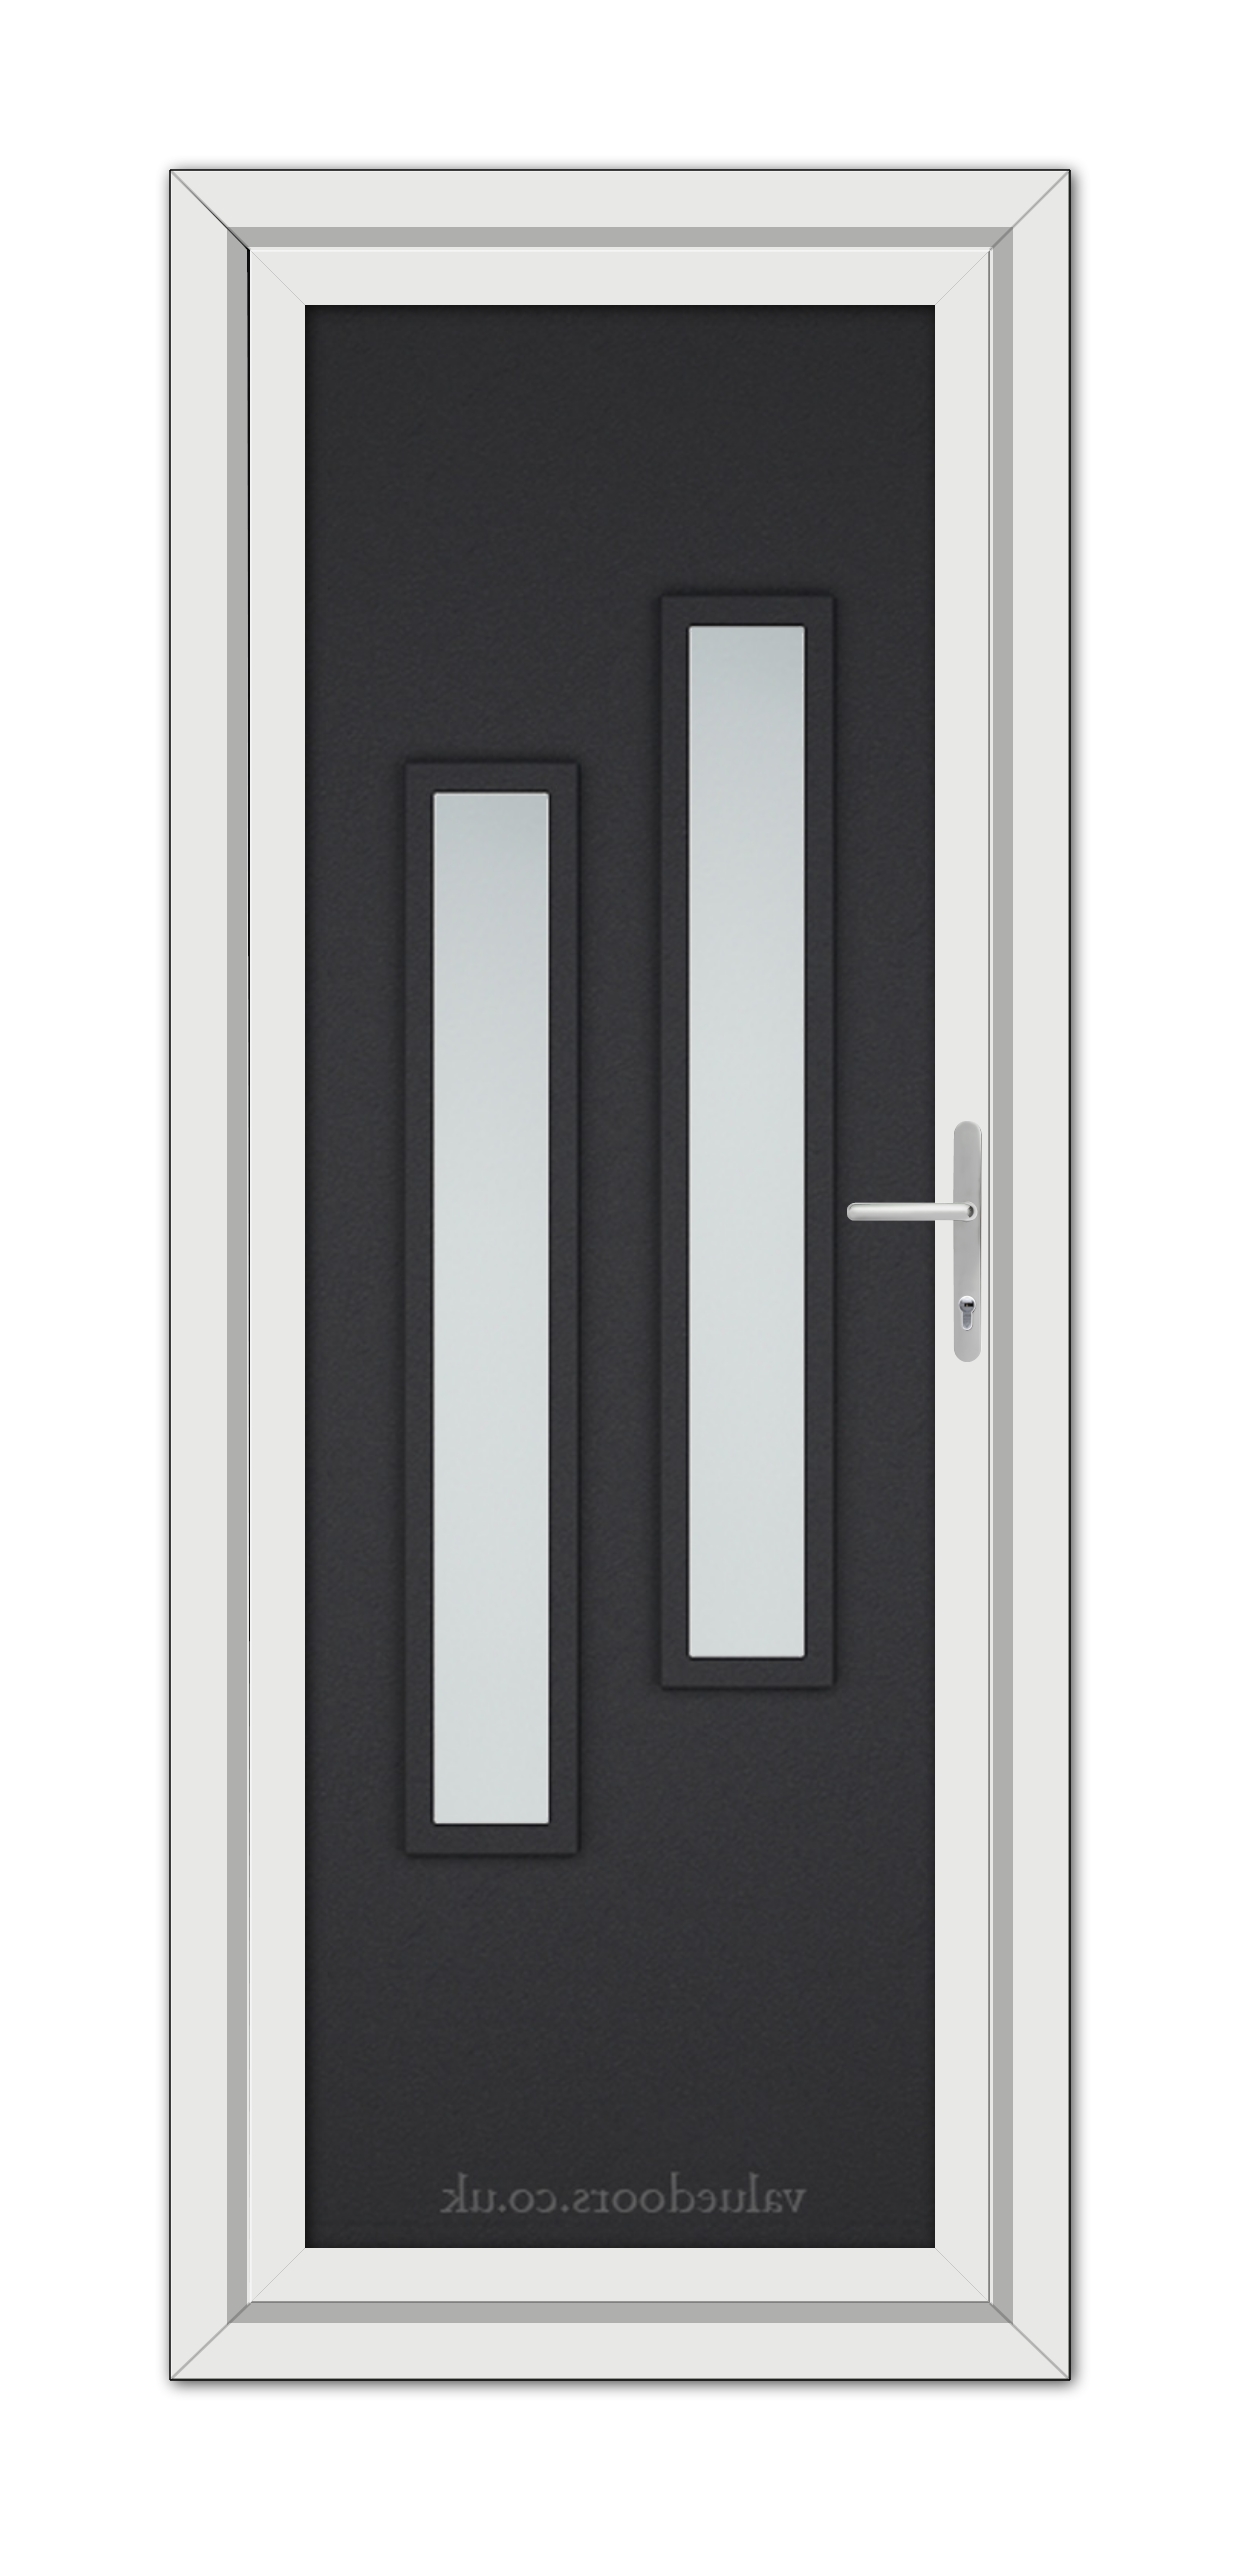 Black Brown Modern 5082 uPVC Door with a vertical handle and two narrow frosted glass panels, framed in white.